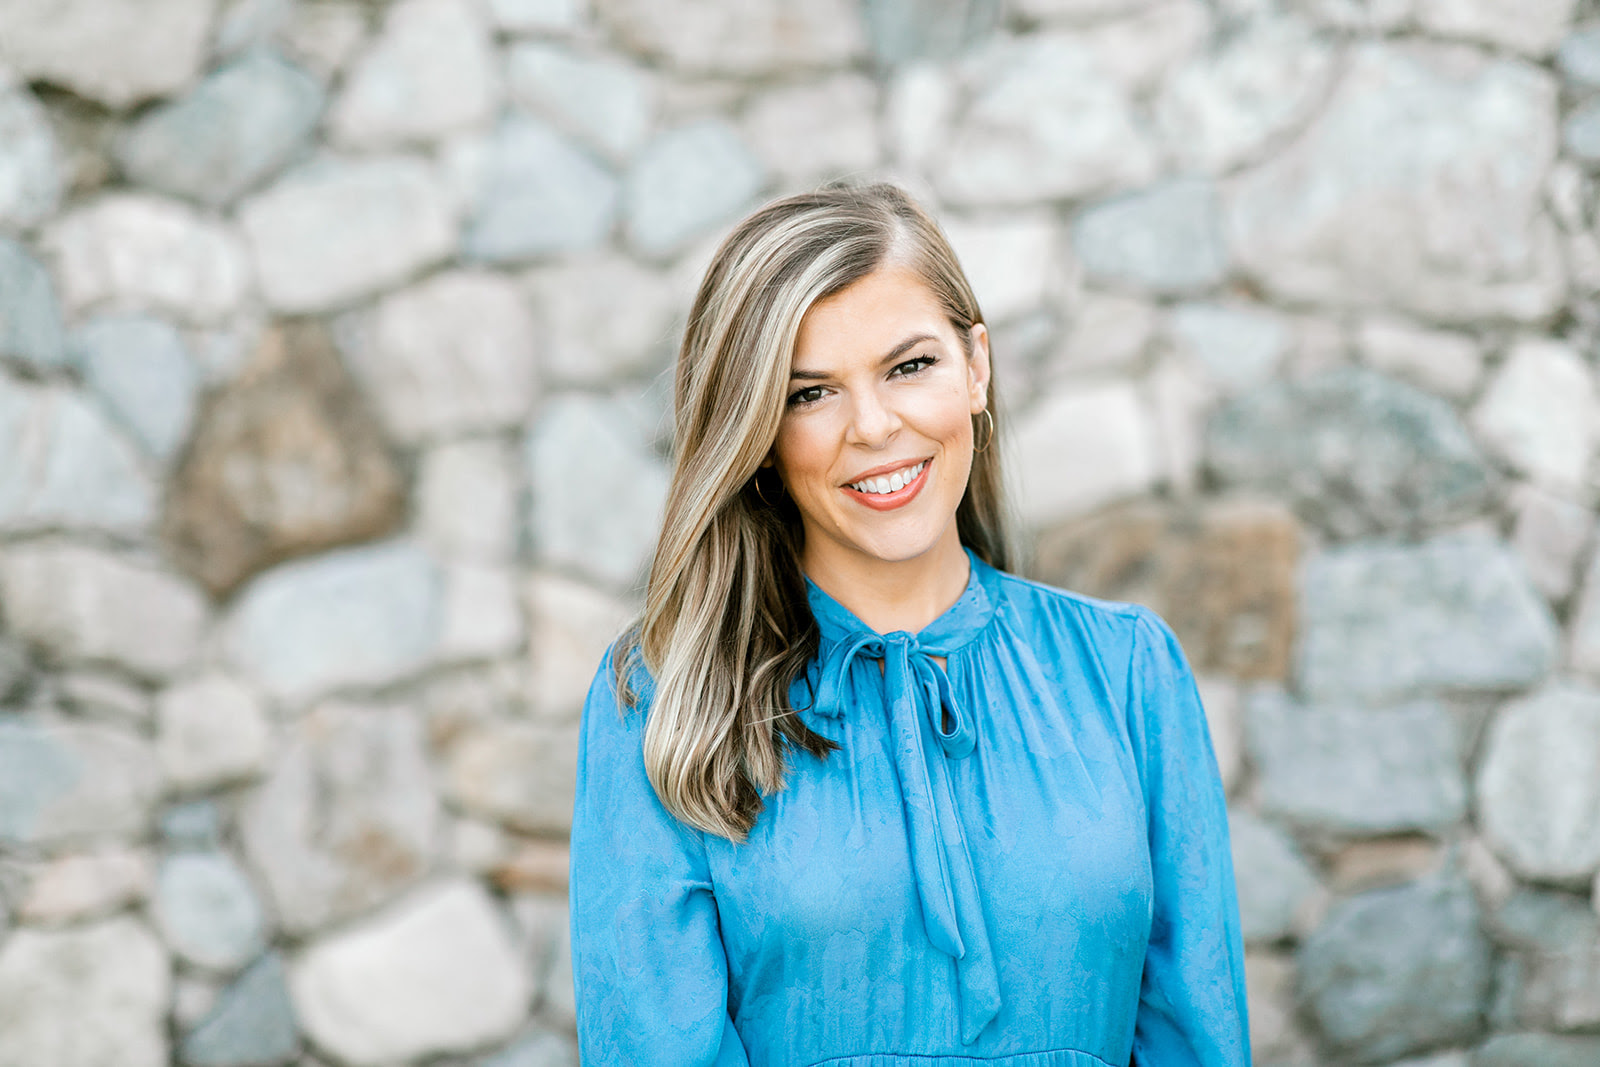 Tickets are limited to see Allie Beth Stuckey